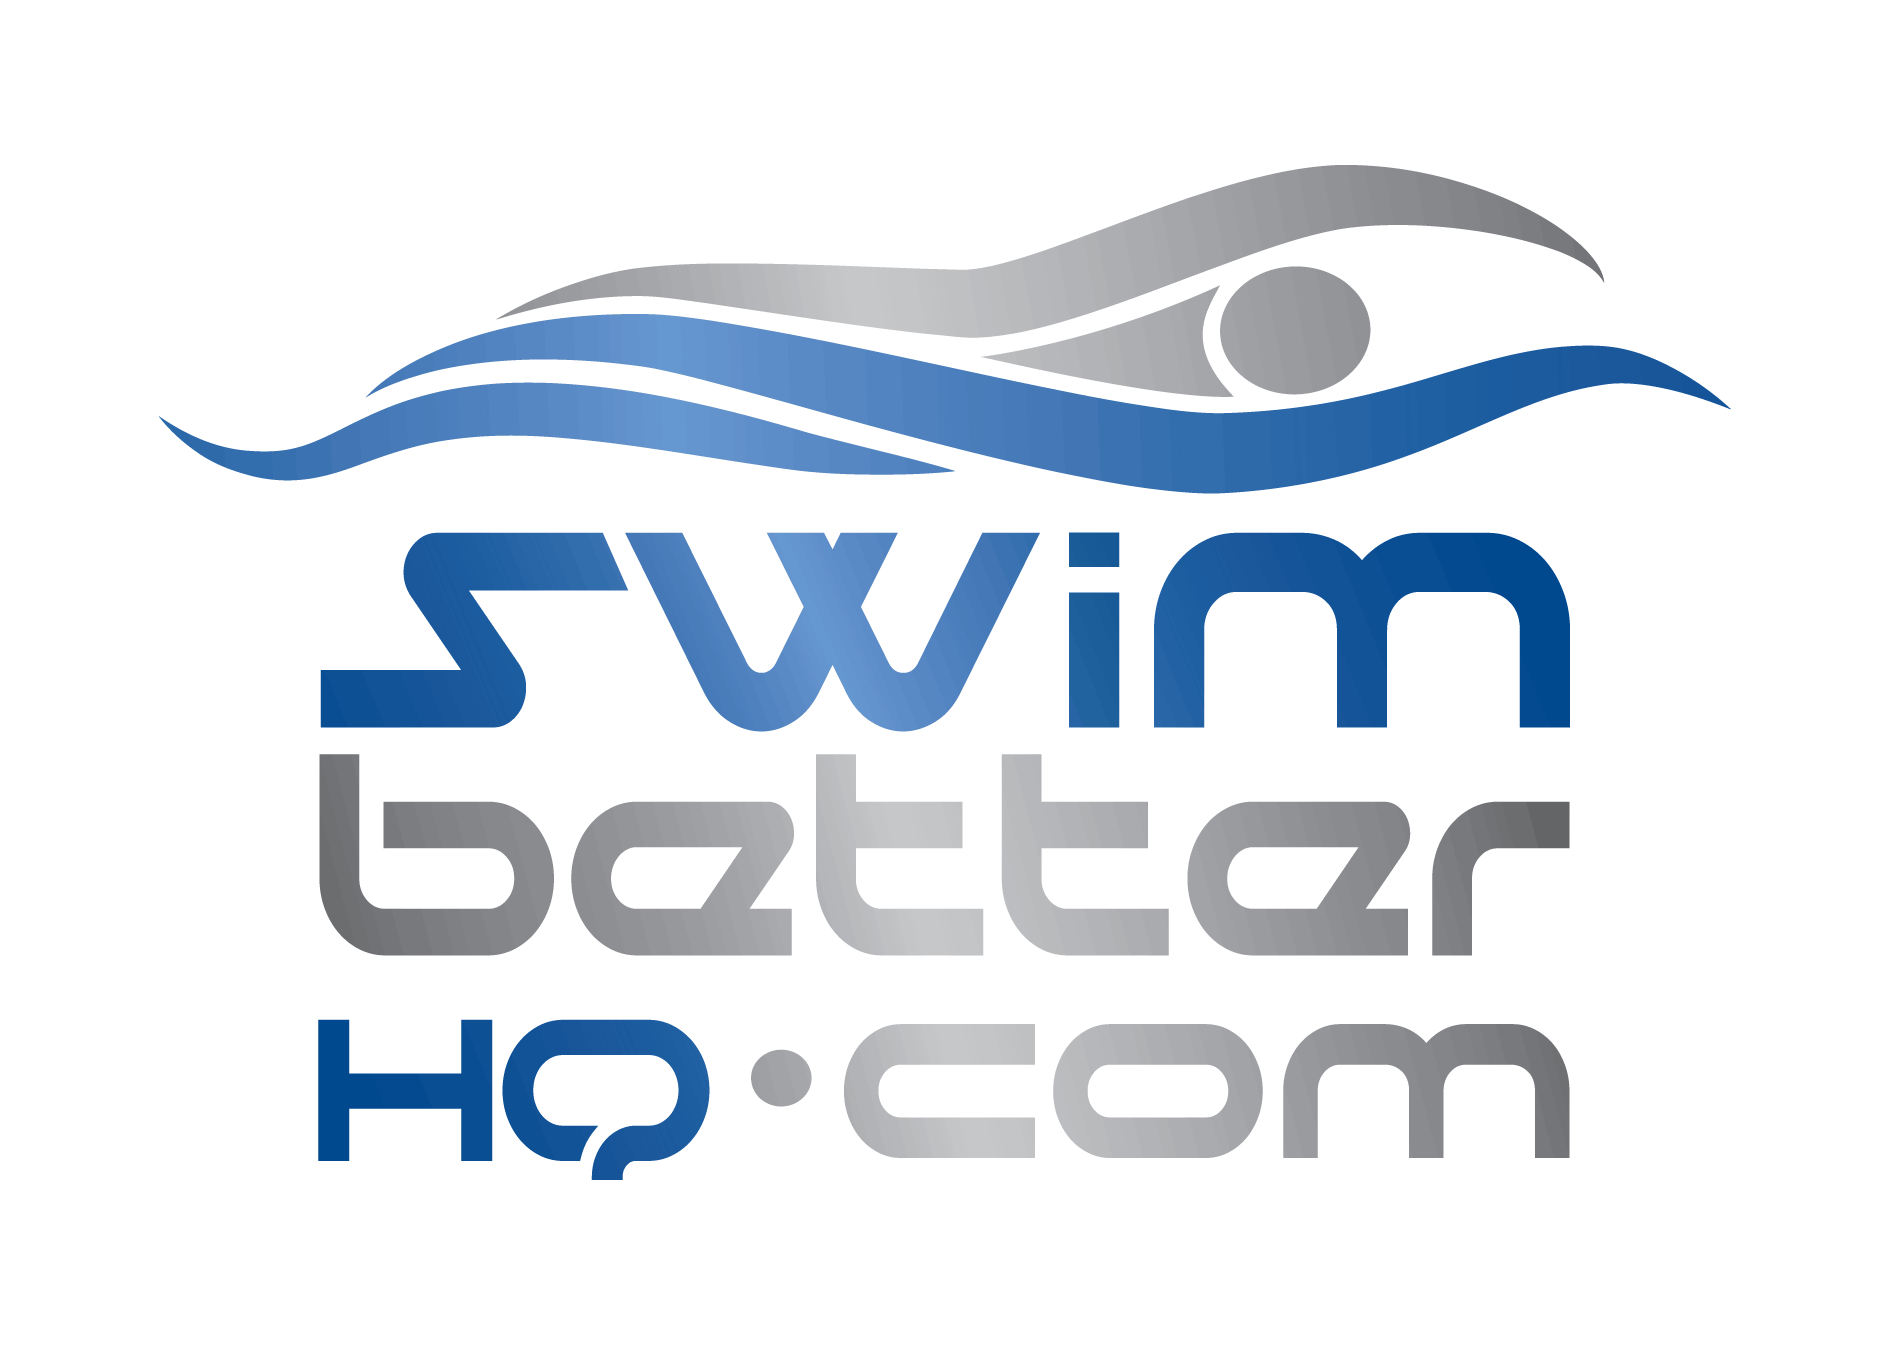 swimmer clipart olympics swimming